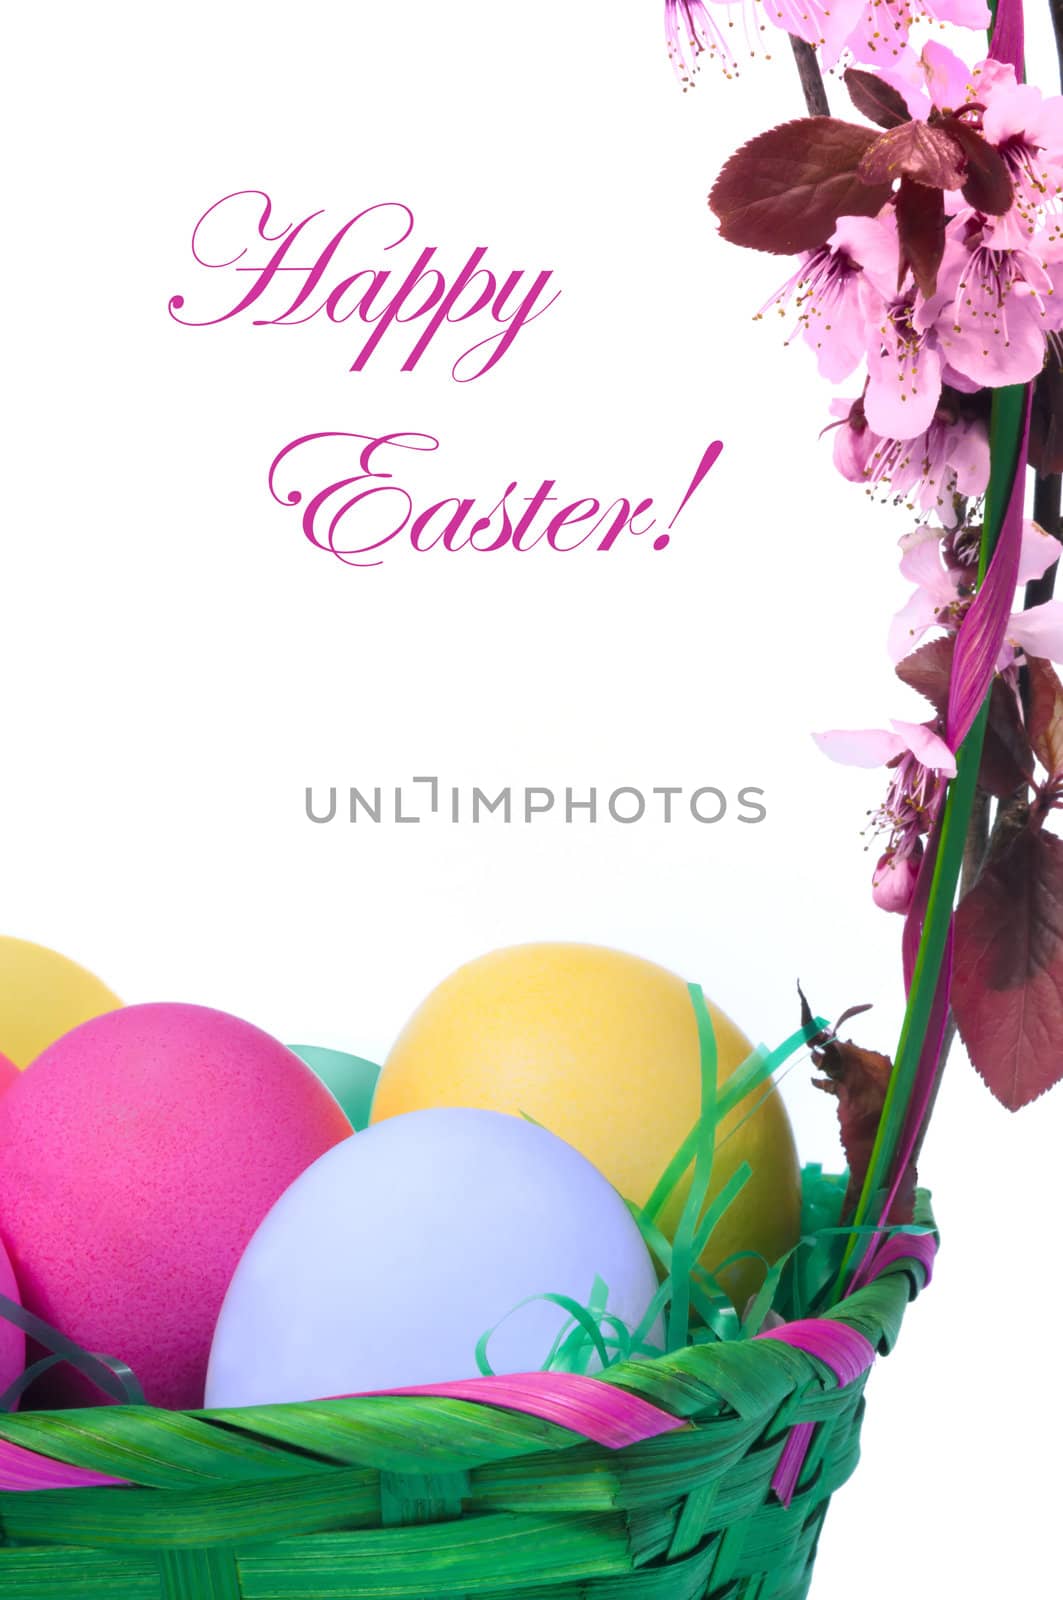 Easter colored eggs in the basket on the white background